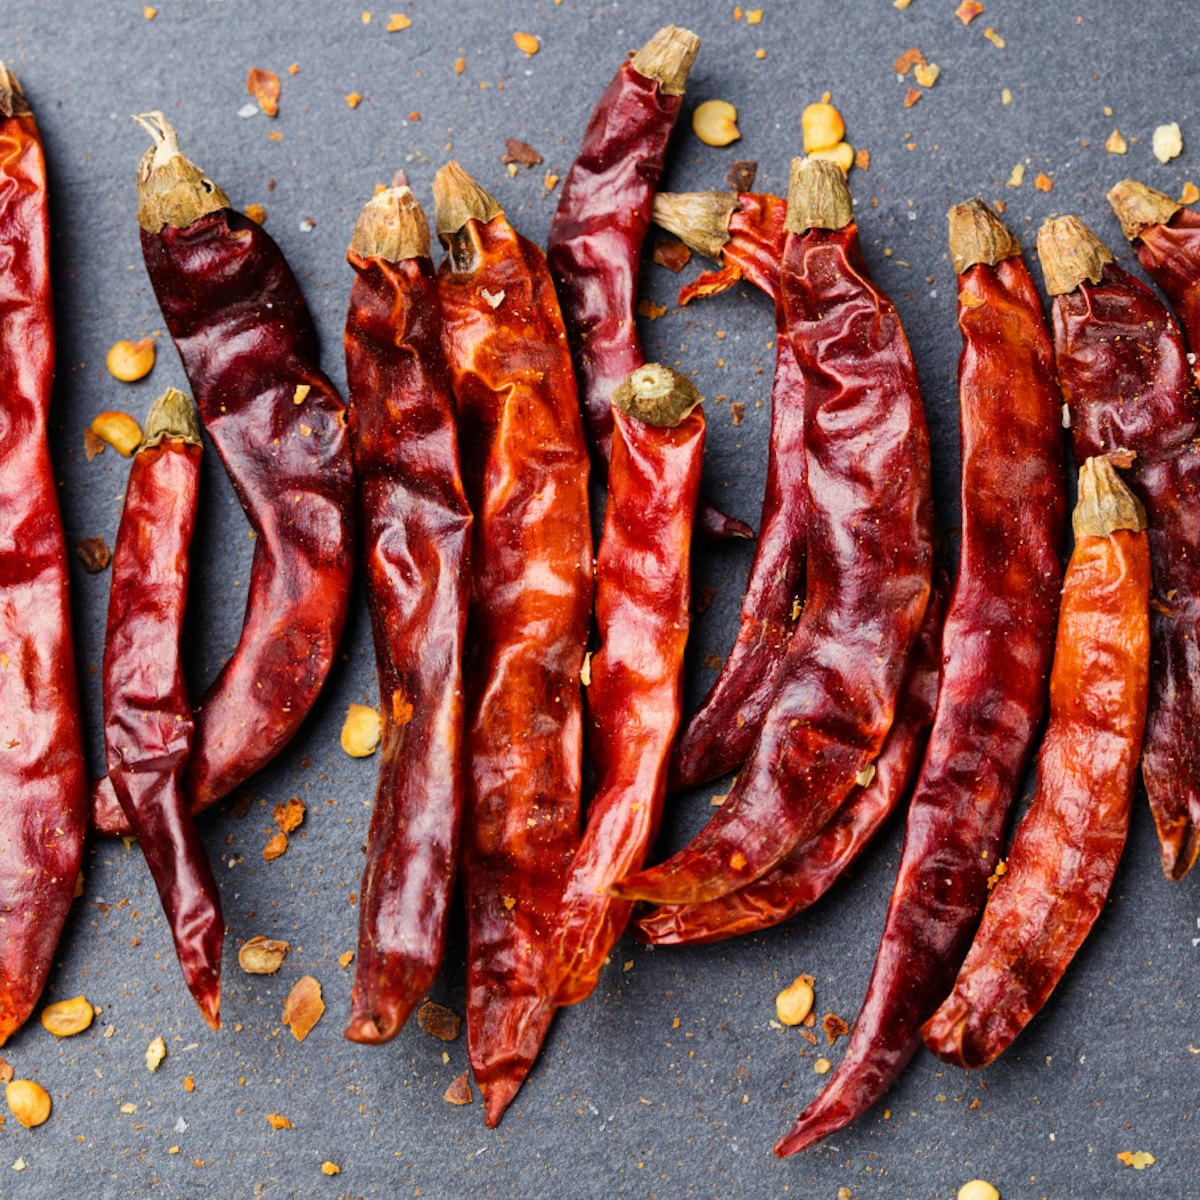 500px Photo ID: 158306929 - Dried red chili peppers on slate background Top view Copy space.